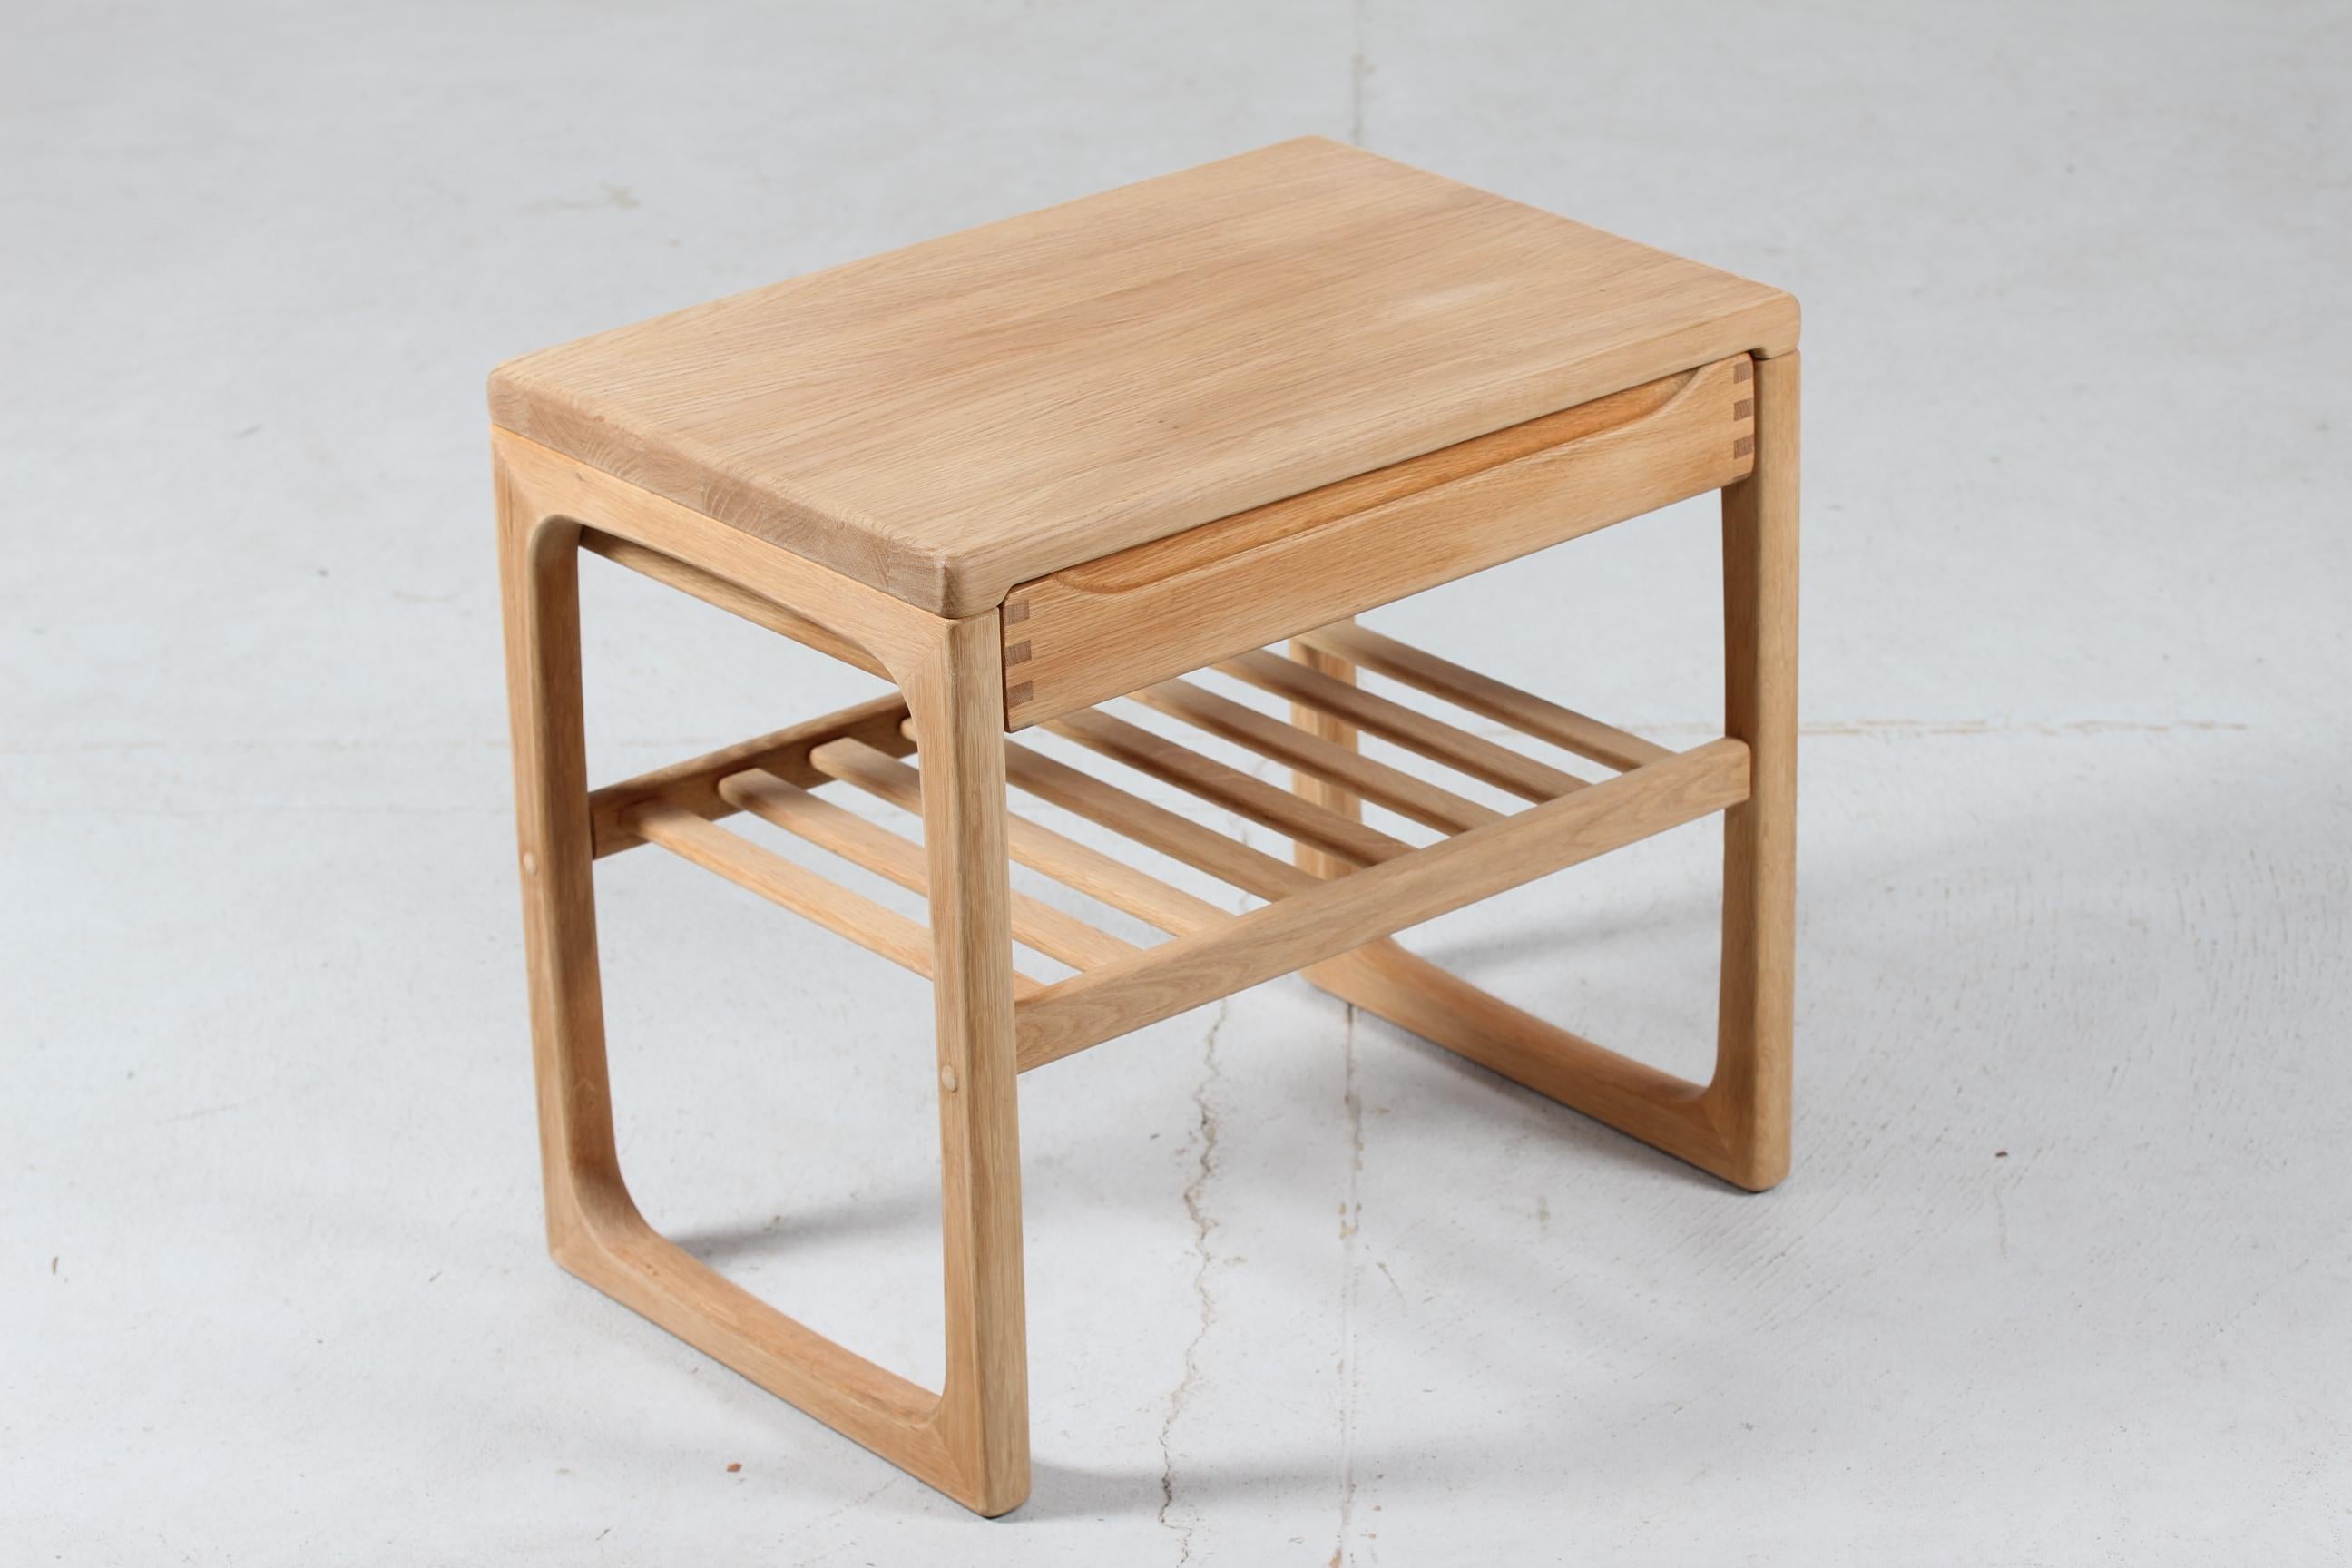 Danish Modern Side Table with Drawer Made of Oak by Danish Cabinetmaker, 1980s For Sale 1